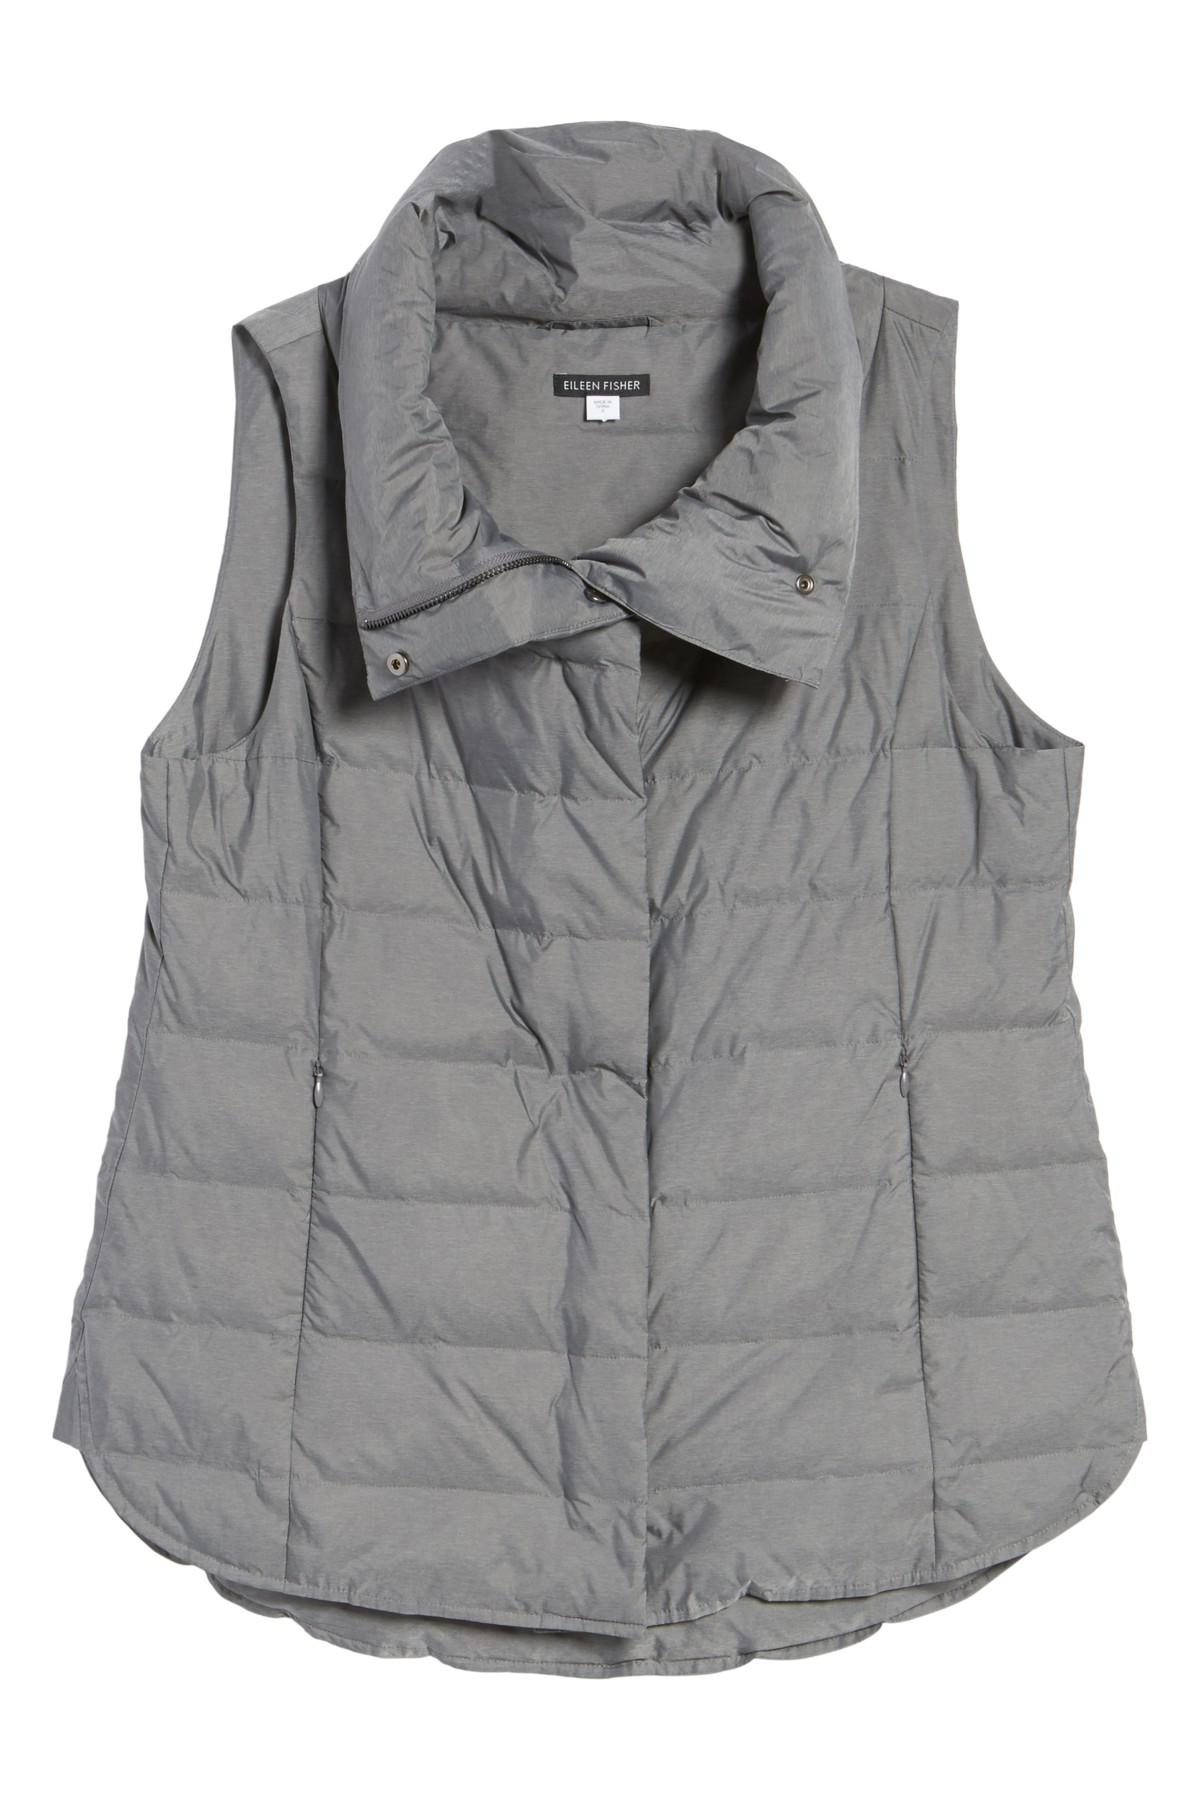 Lyst Eileen Fisher Stand Collar Vest in Gray